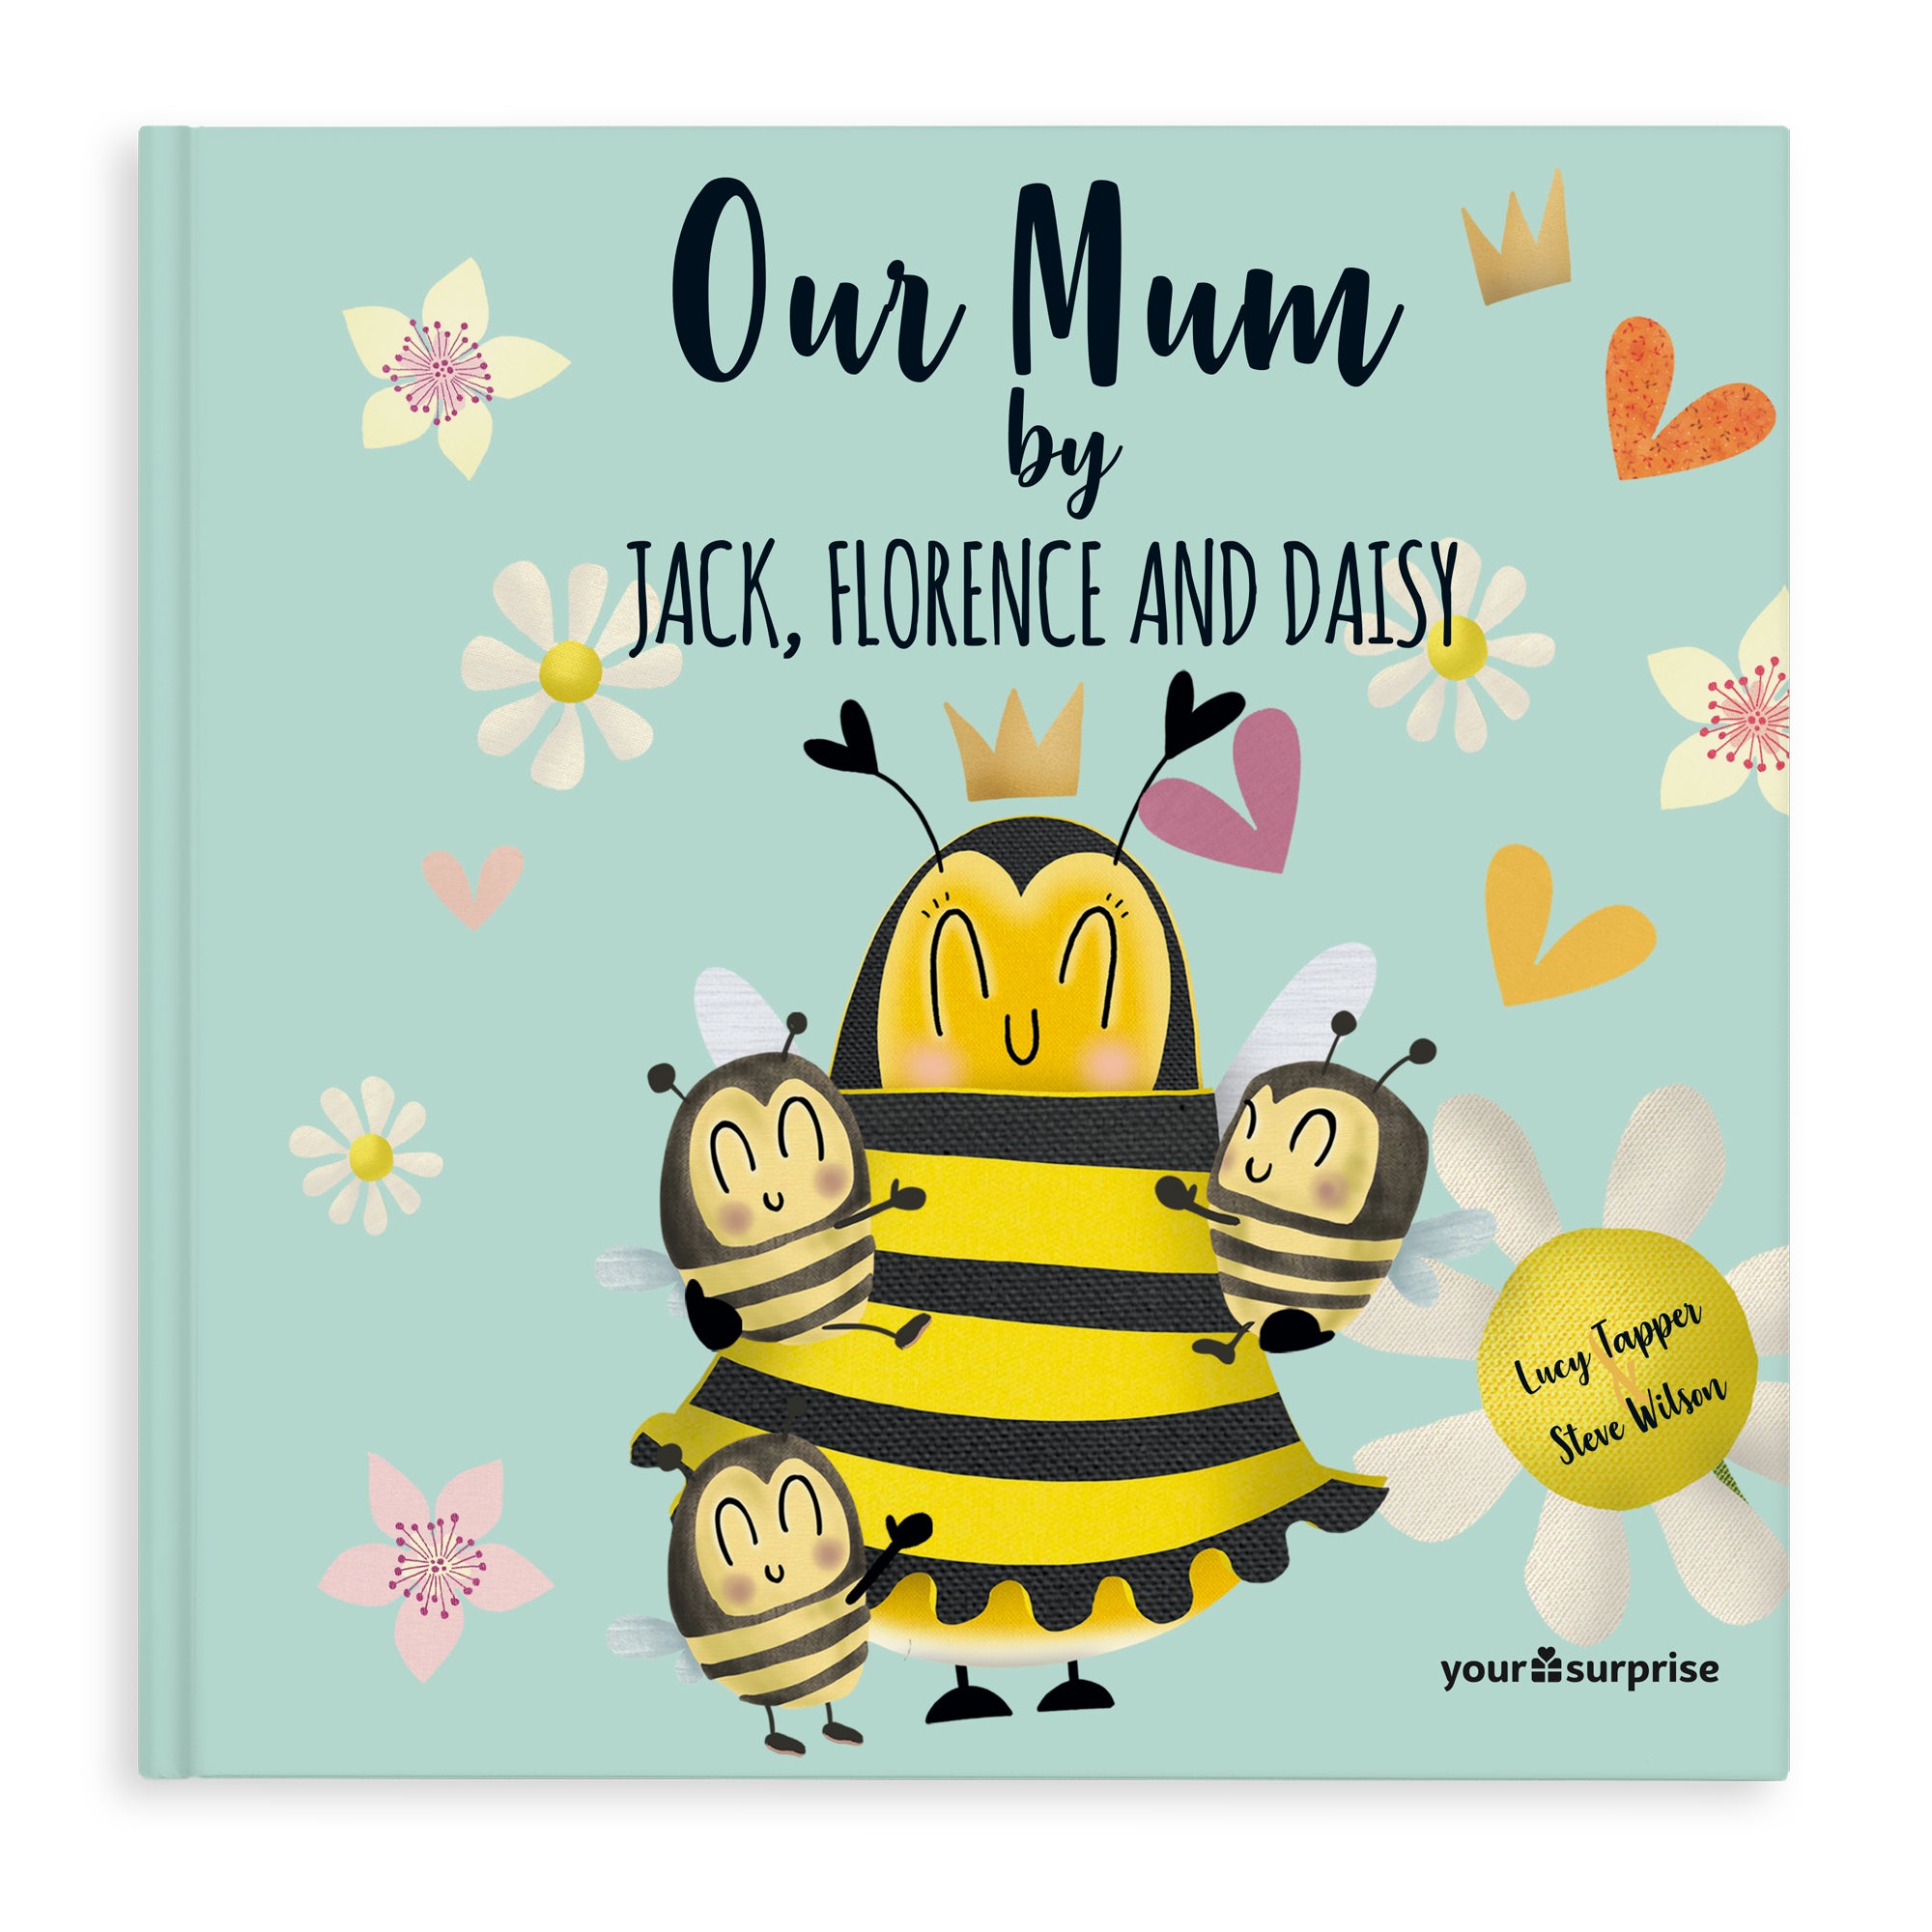 Personalised book - Our mum - Softcover